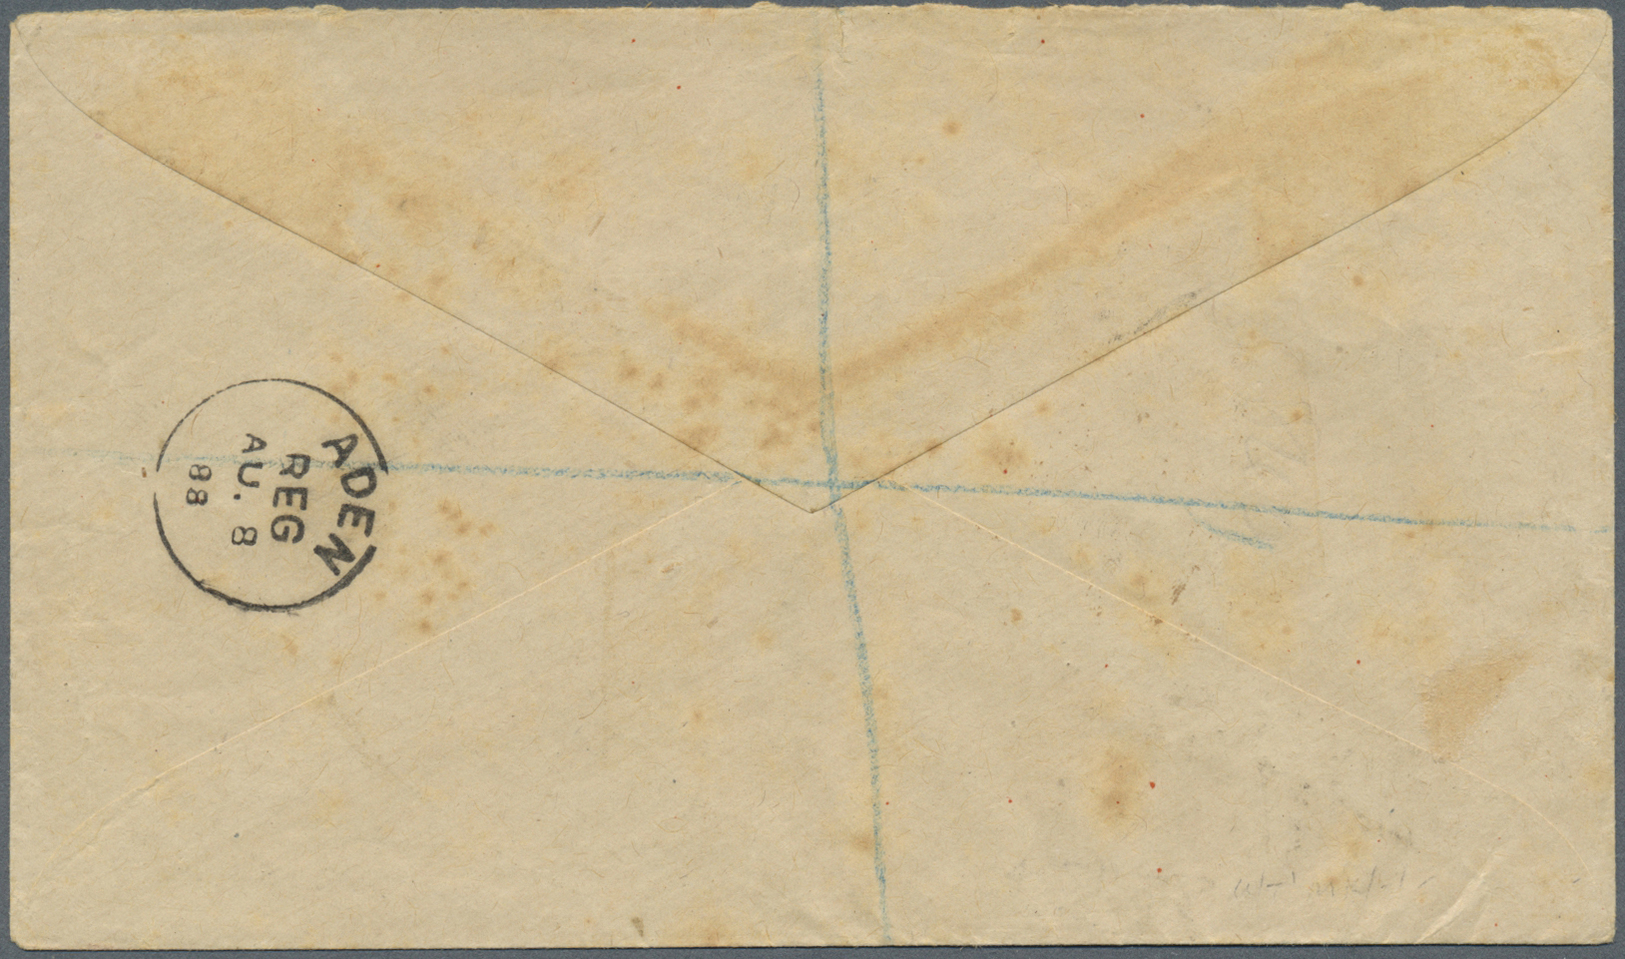 Br Aden: 1888 Registered Telegram, Printed By 'The Eastern Telegraph Company', Used From Aden To Mauritius, Franked With - Yémen